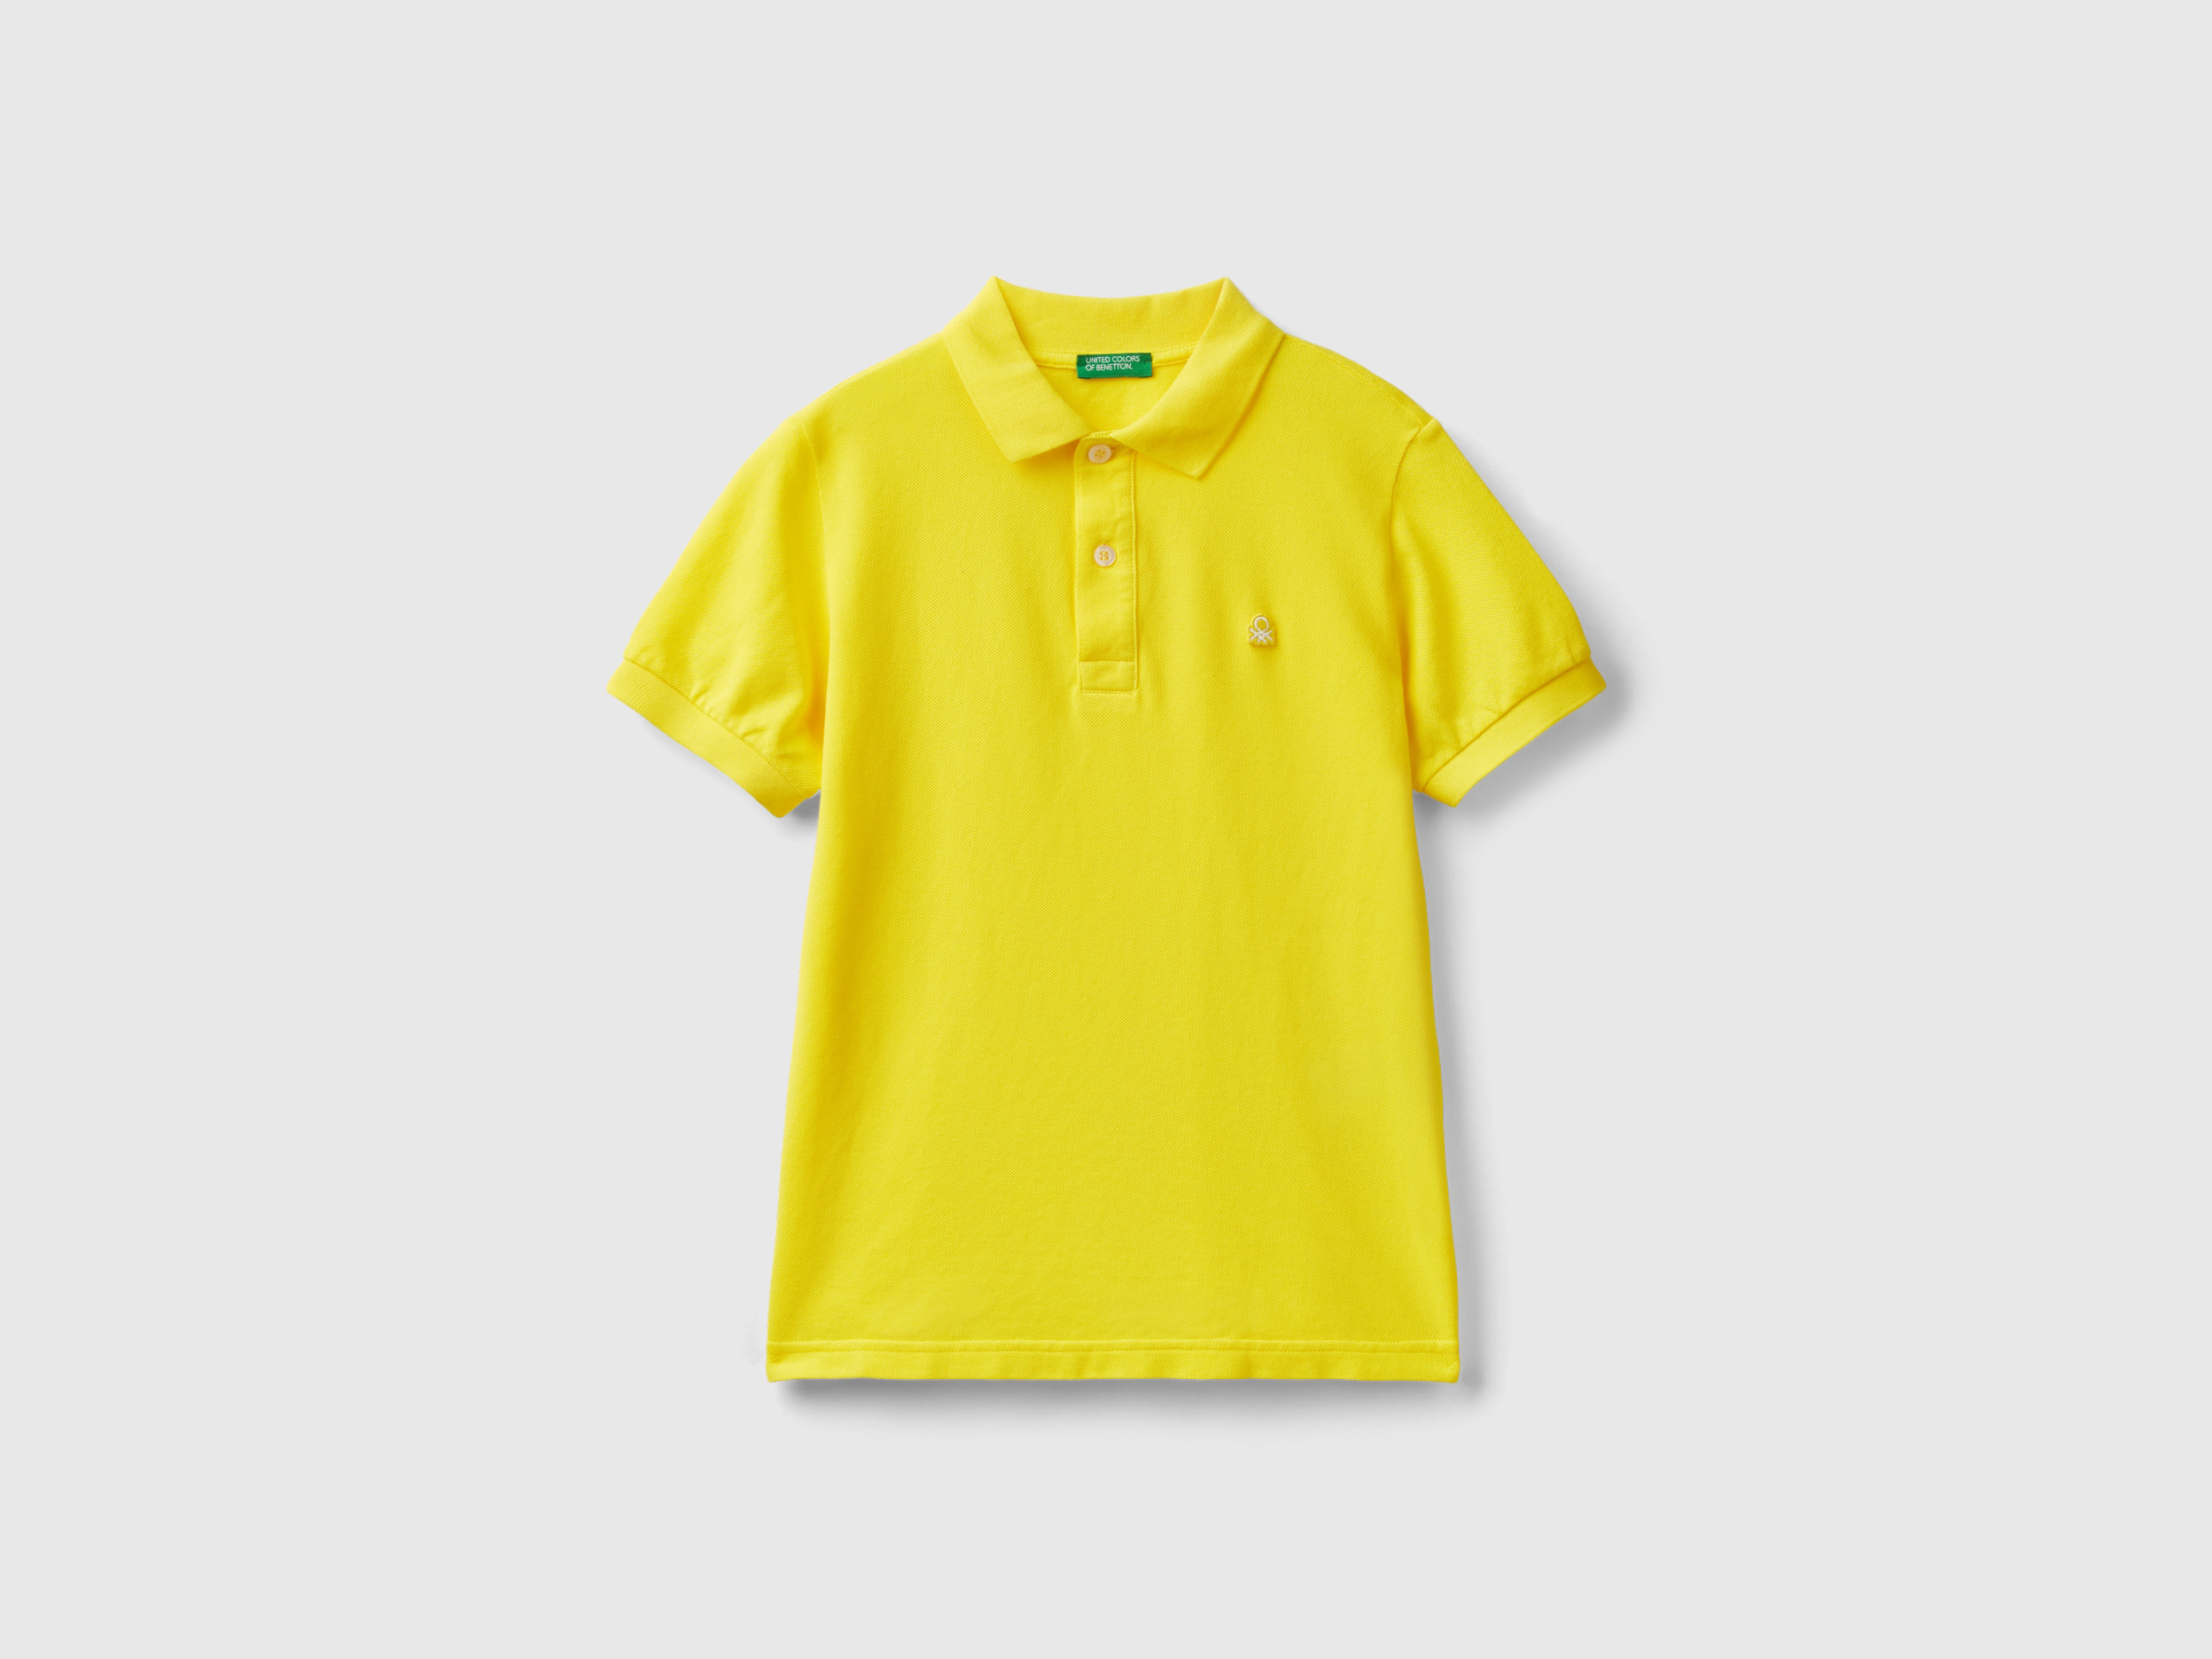 Image of Benetton, Slim Fit Polo In 100% Organic Cotton, size S, Yellow, Kids